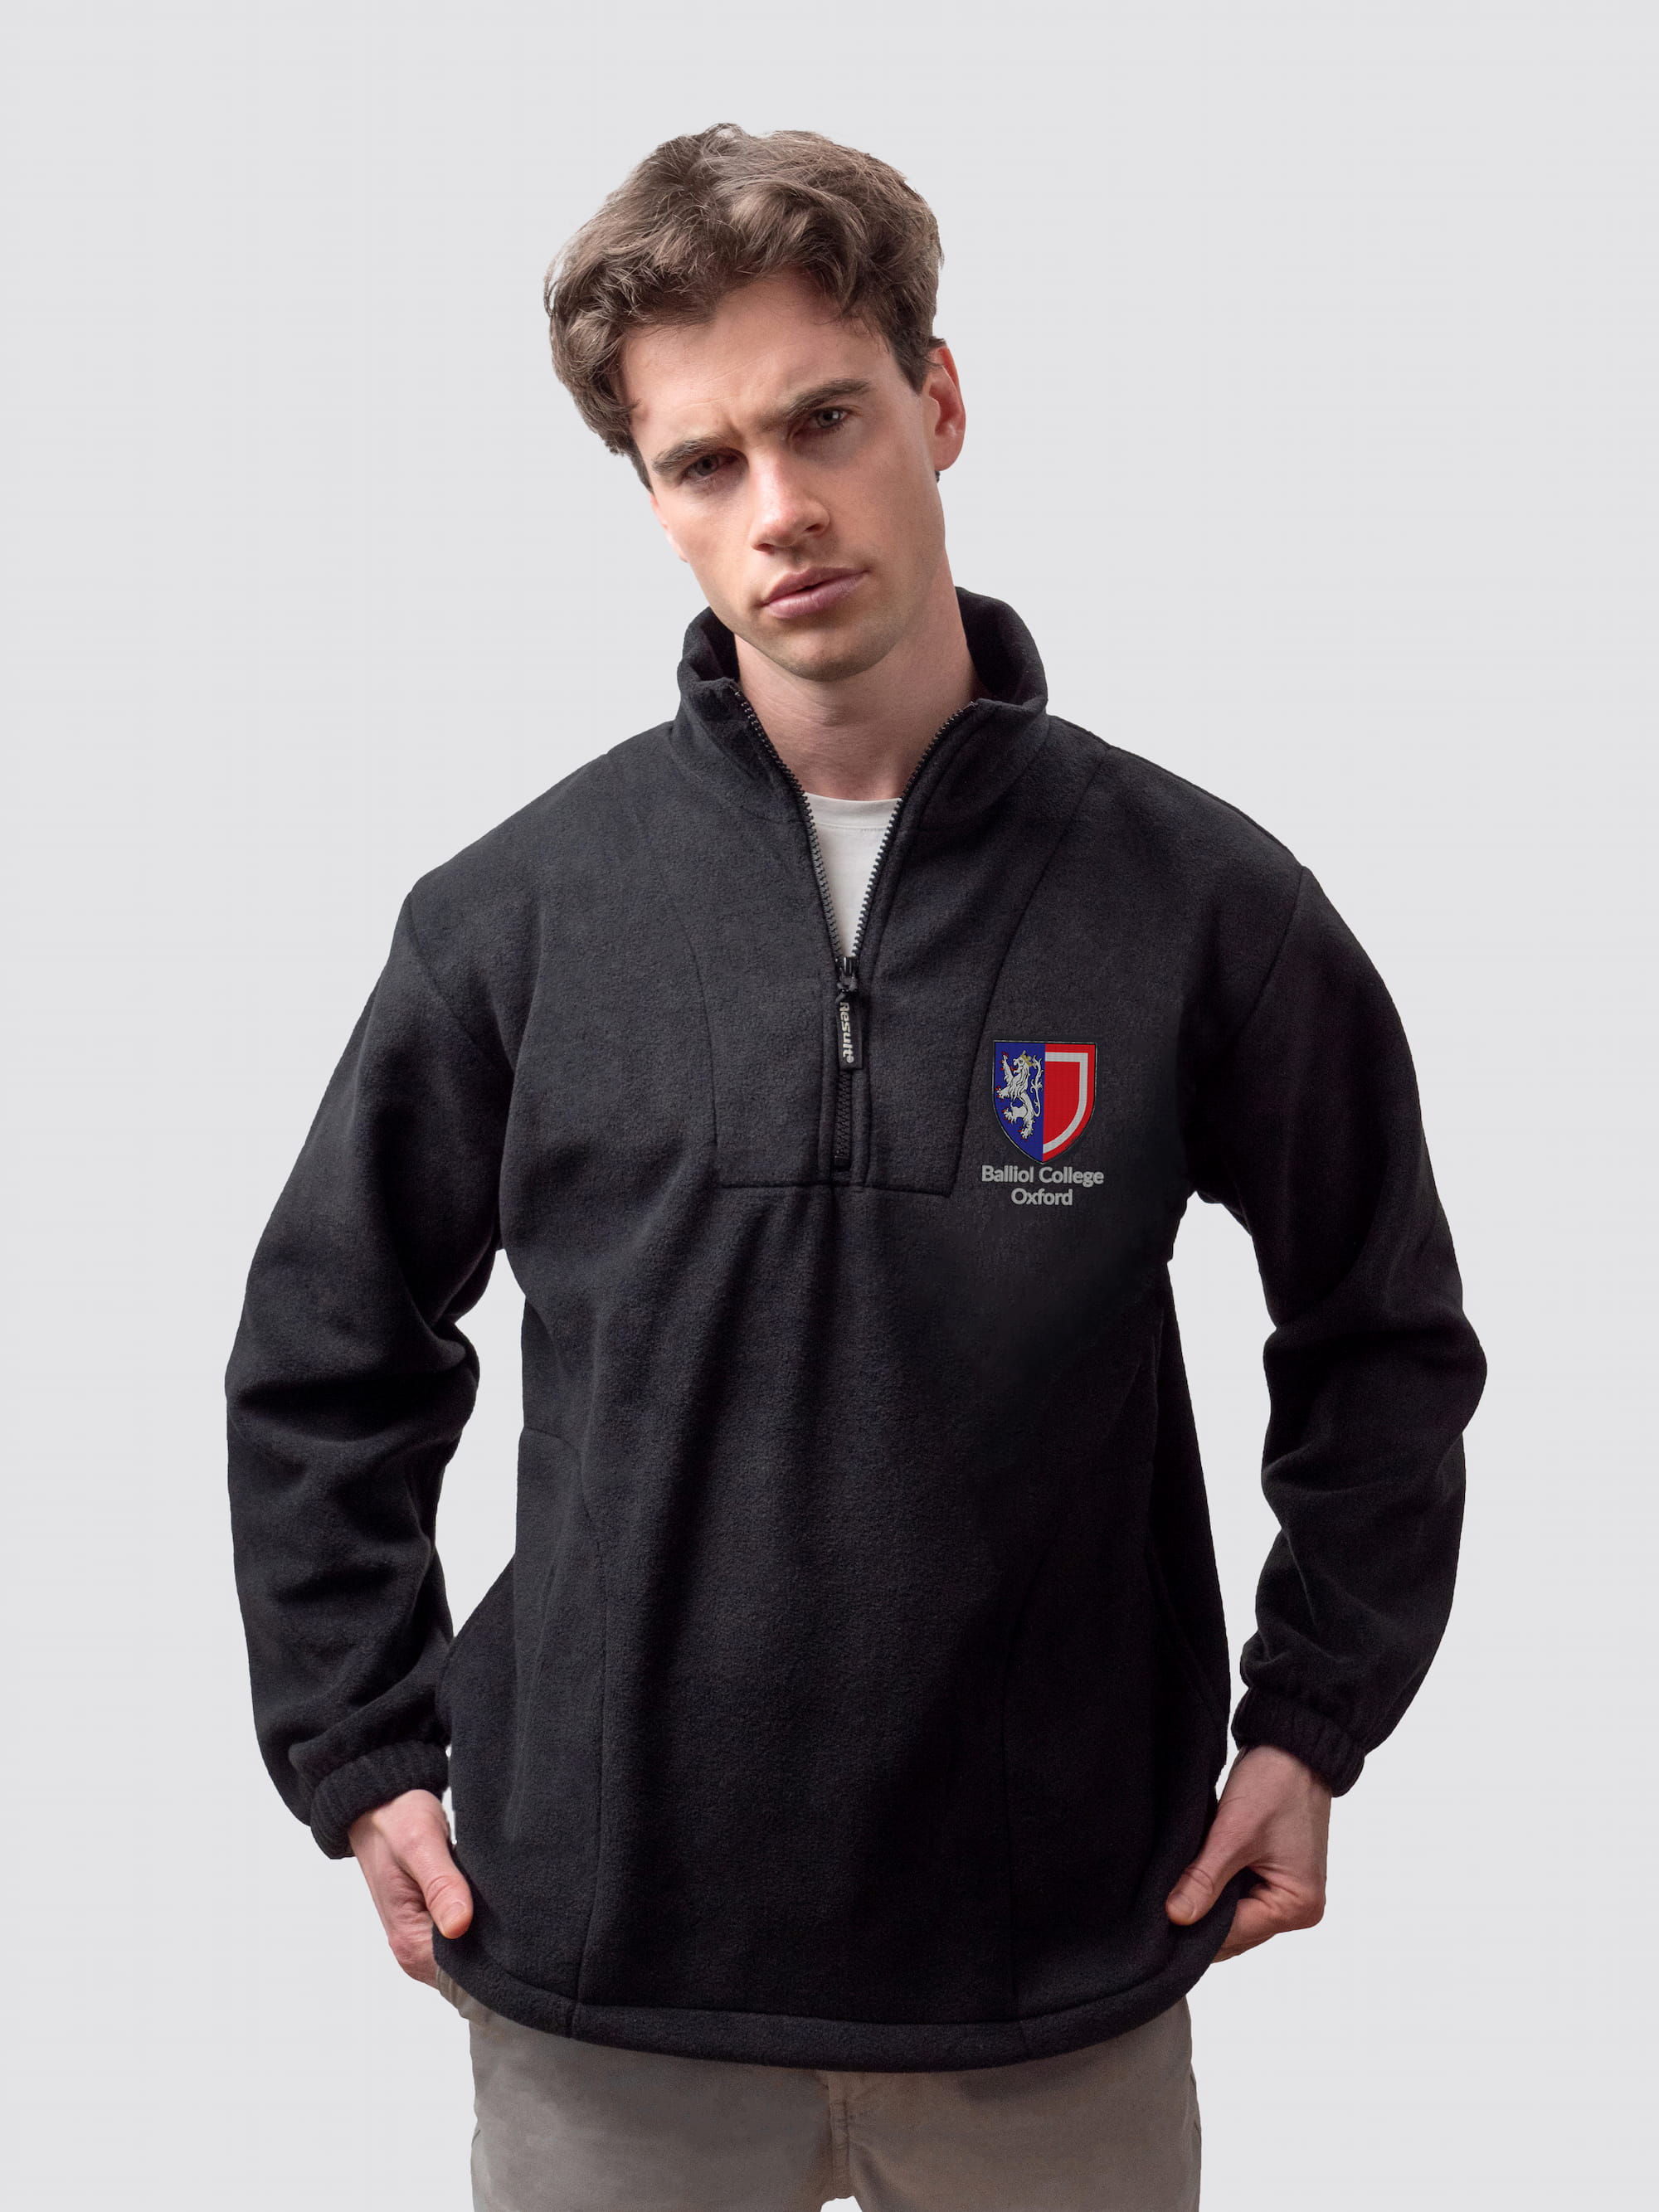 Oxford university fleece, with custom embroidered initials and Balliol crest